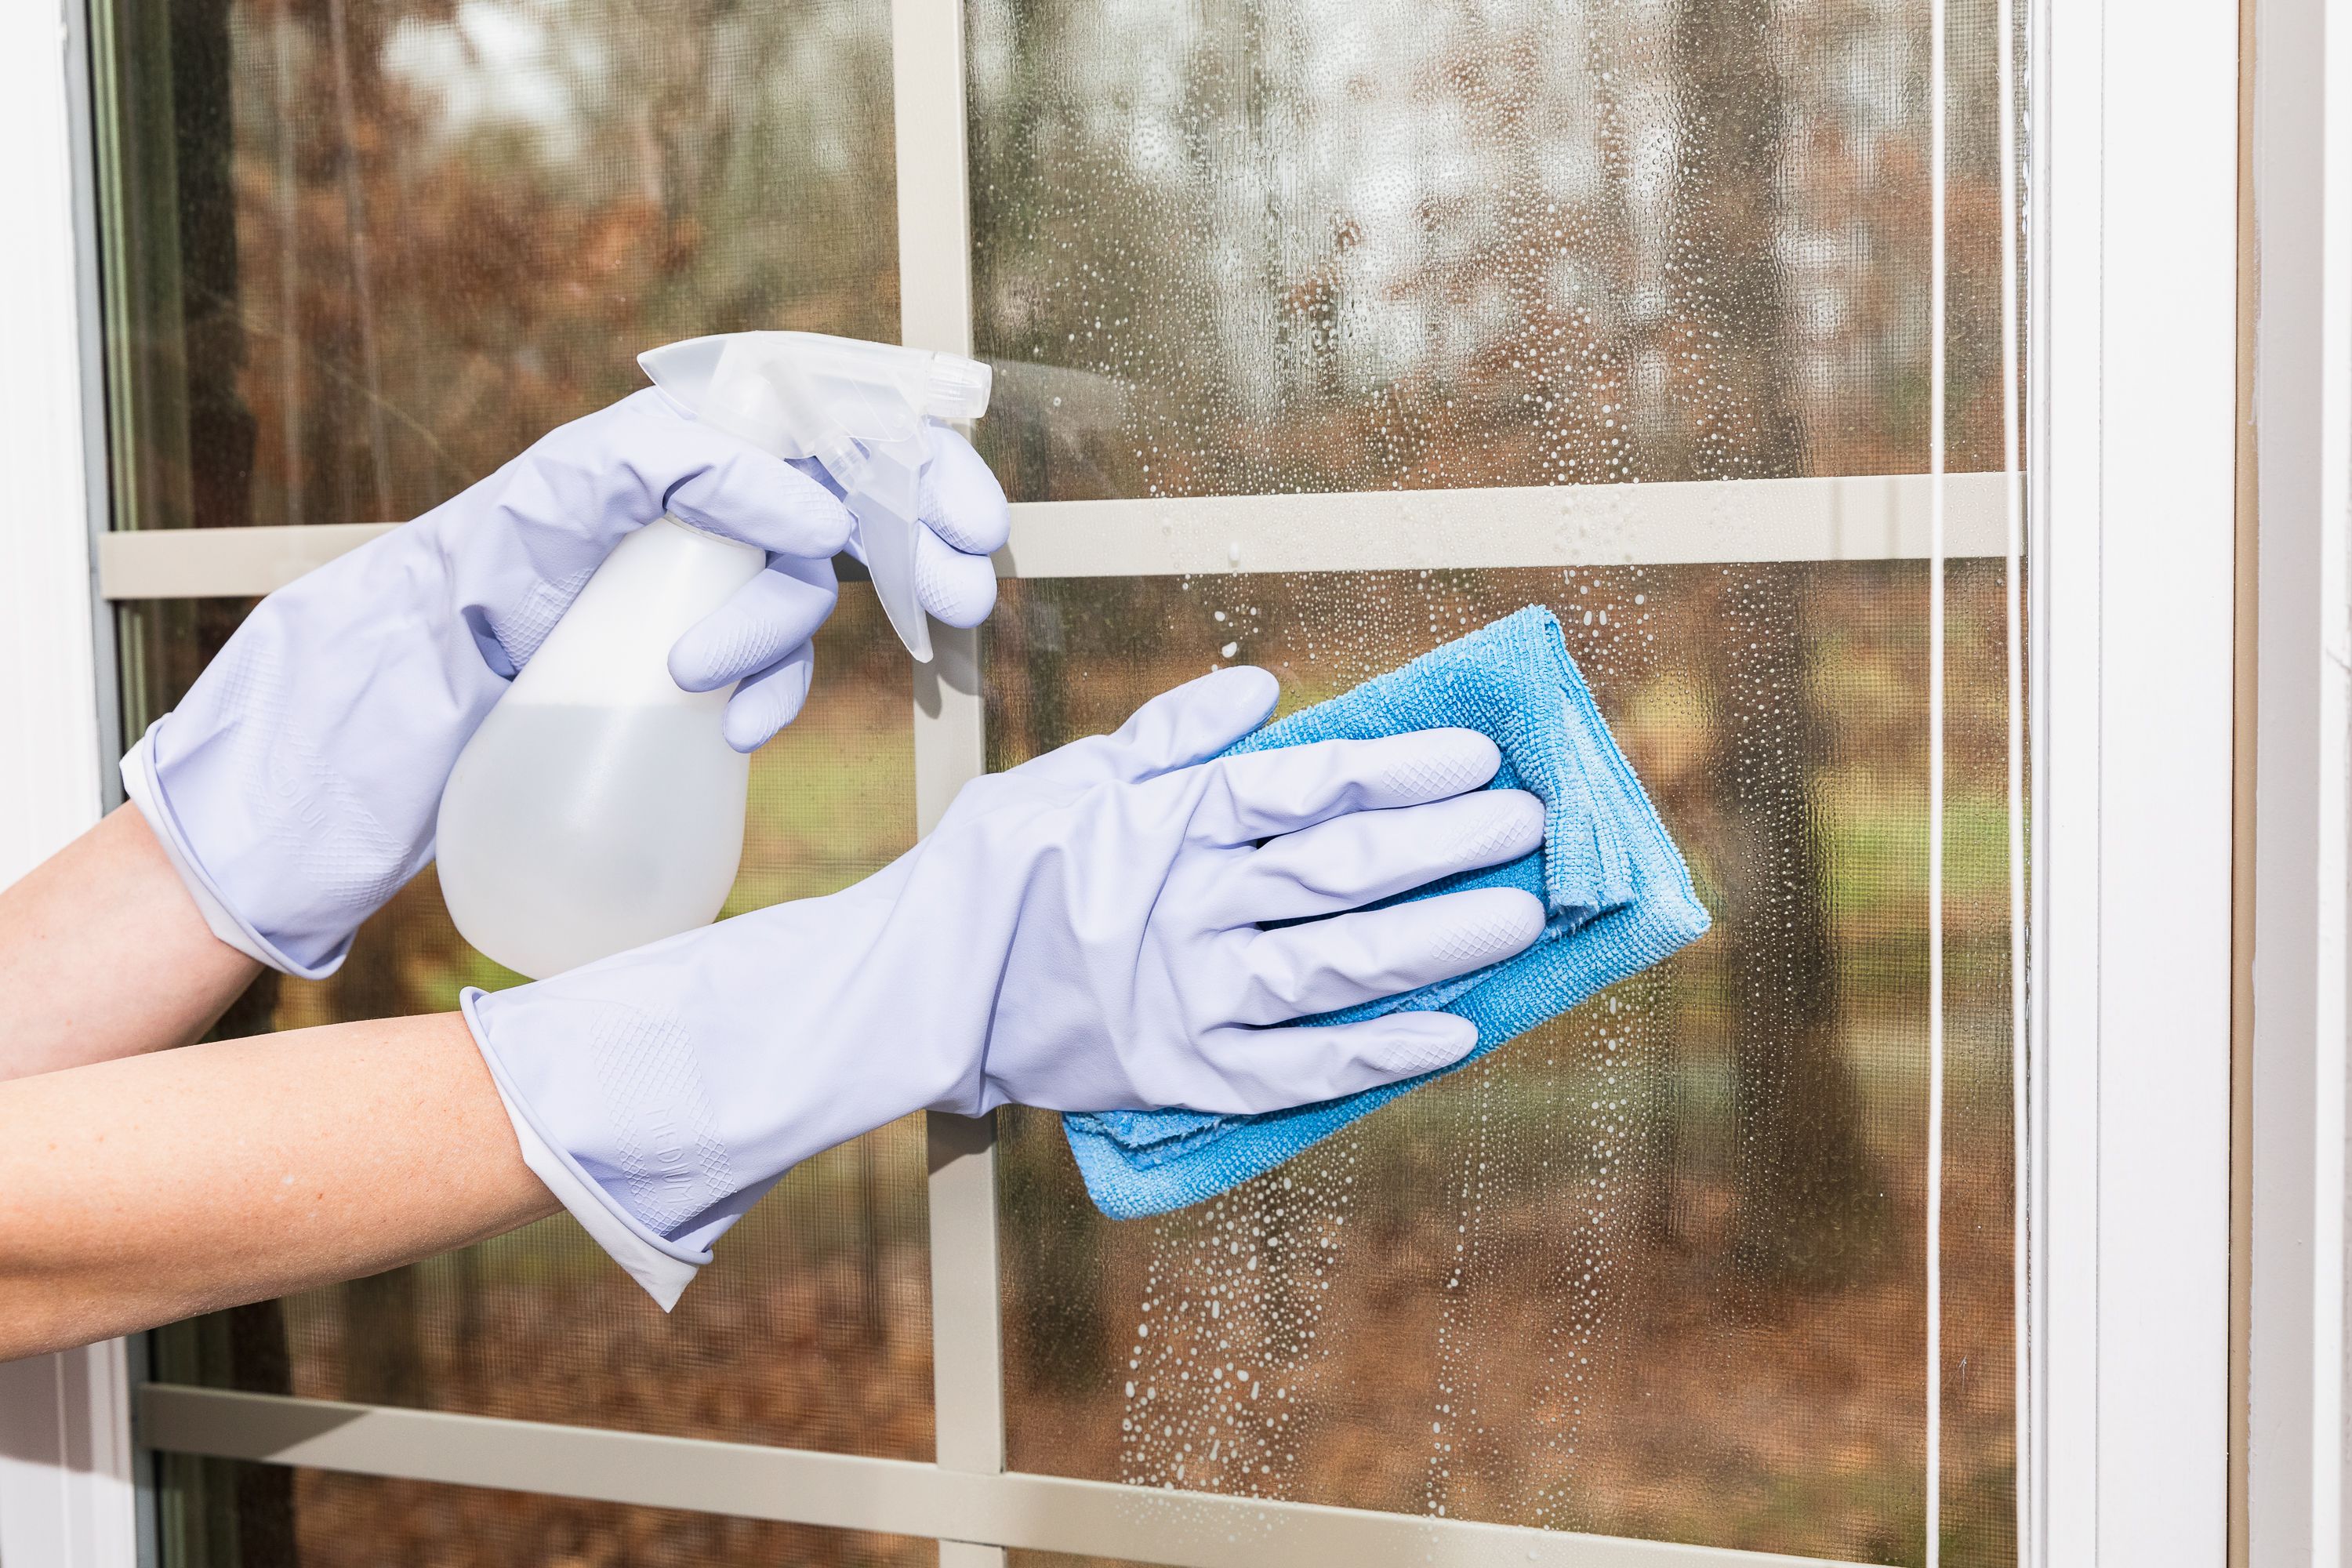 Windows Cleaning Service